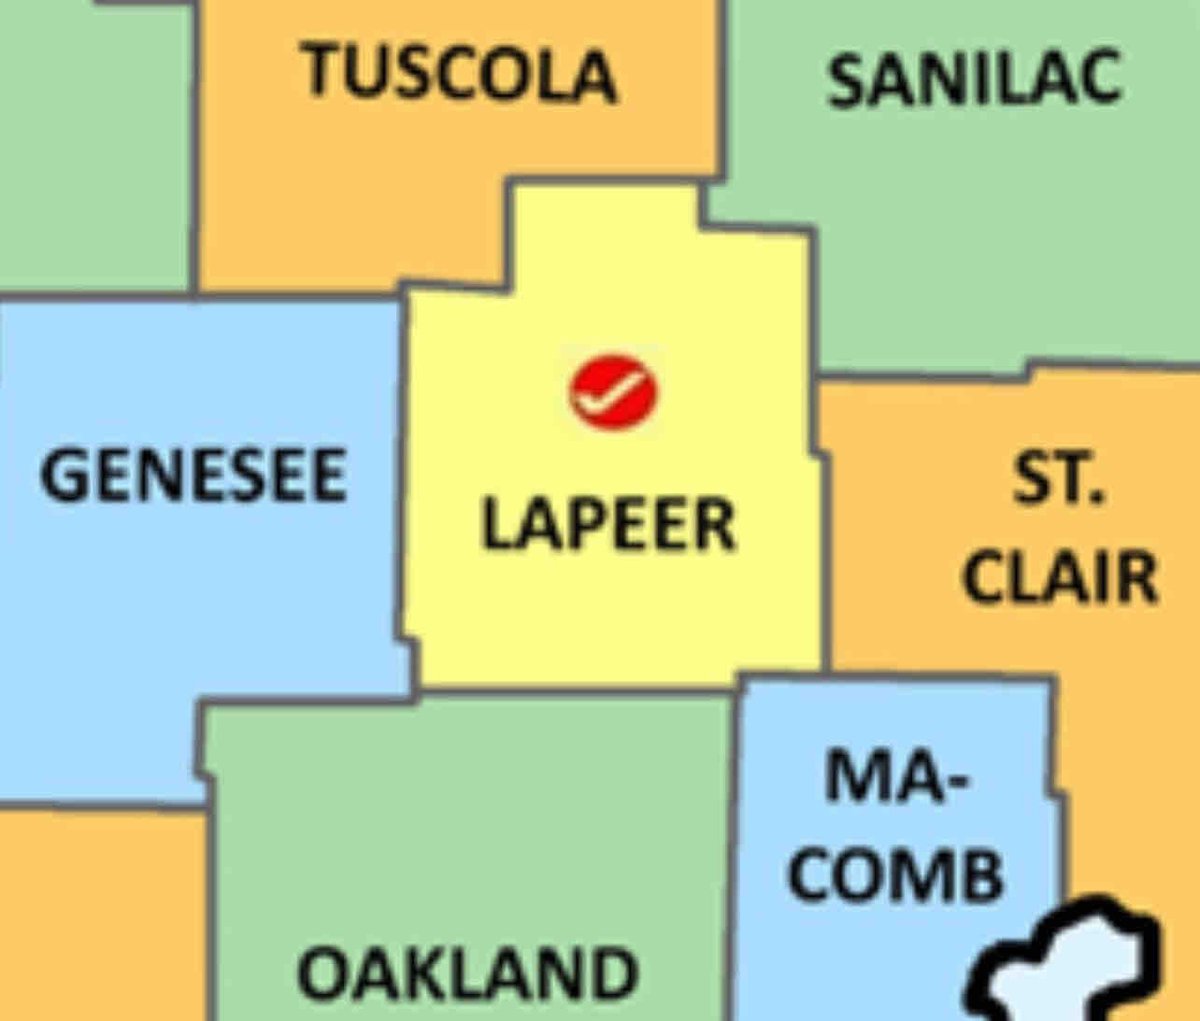 Realcomp Public Records Update: 

Lapeer County 2023 winter taxes and property descriptive data NOW AVAILABLE on RCO3! 

#RealcompMLS #michiganrealtors